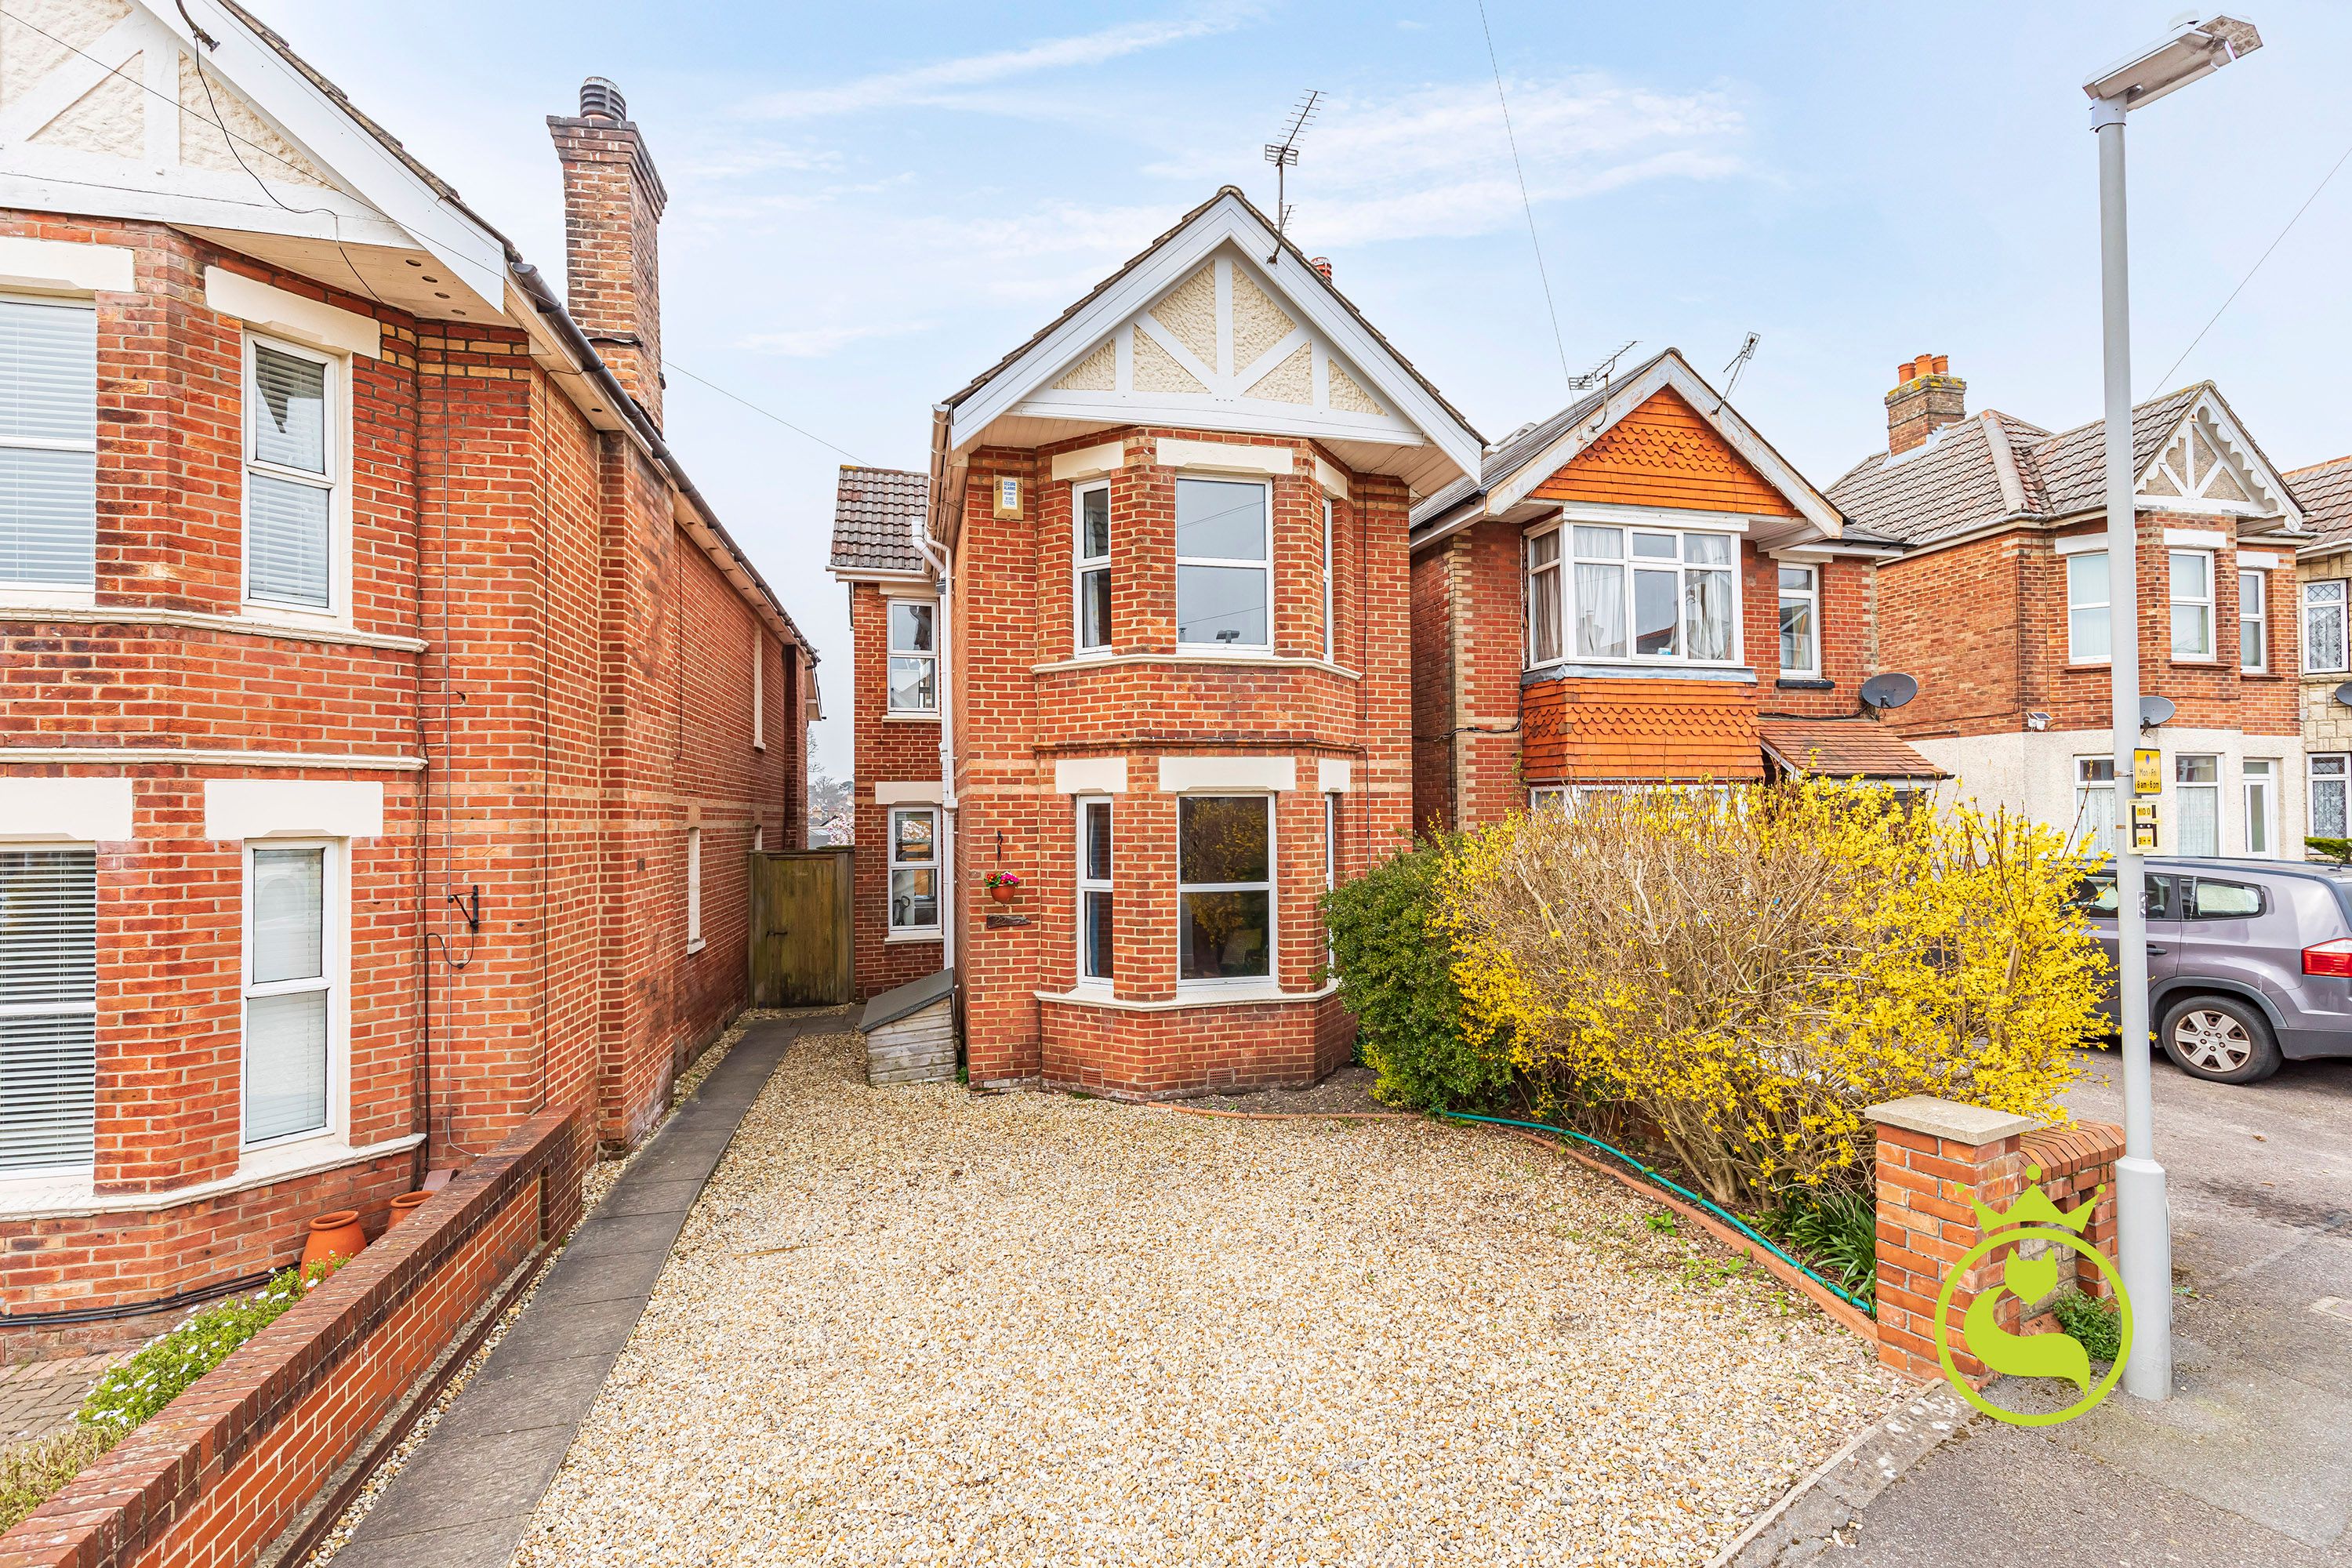 This fantastic detached residence offers the complete package for today’s family lifestyle. Oozing with character, this home is not be missed and is in Courthill catchment!